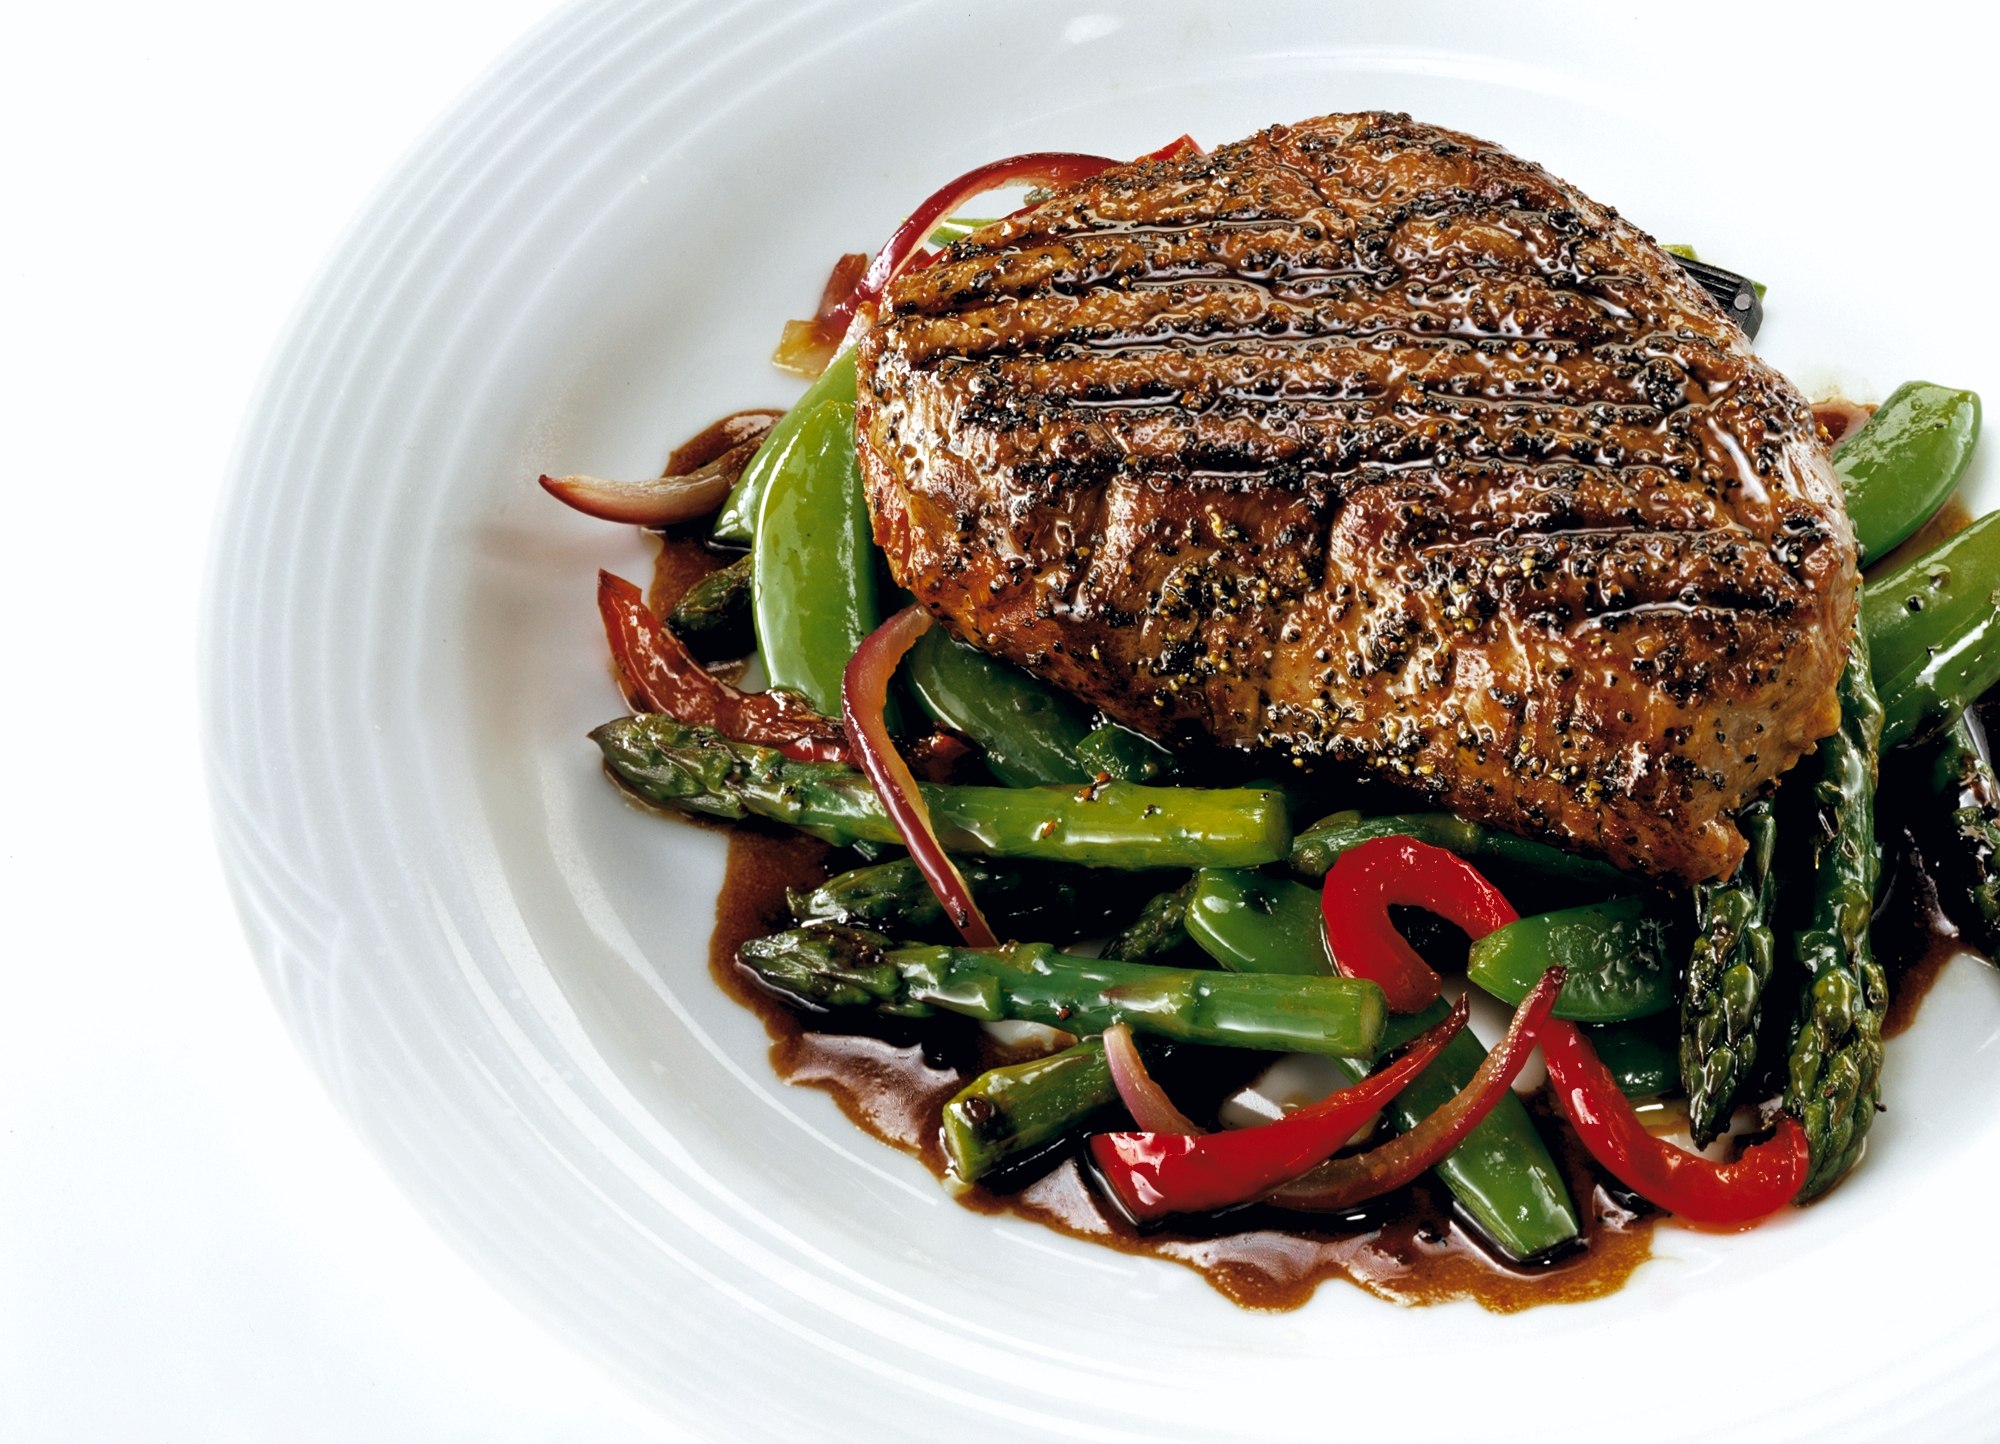 Steak with grilled vegetables